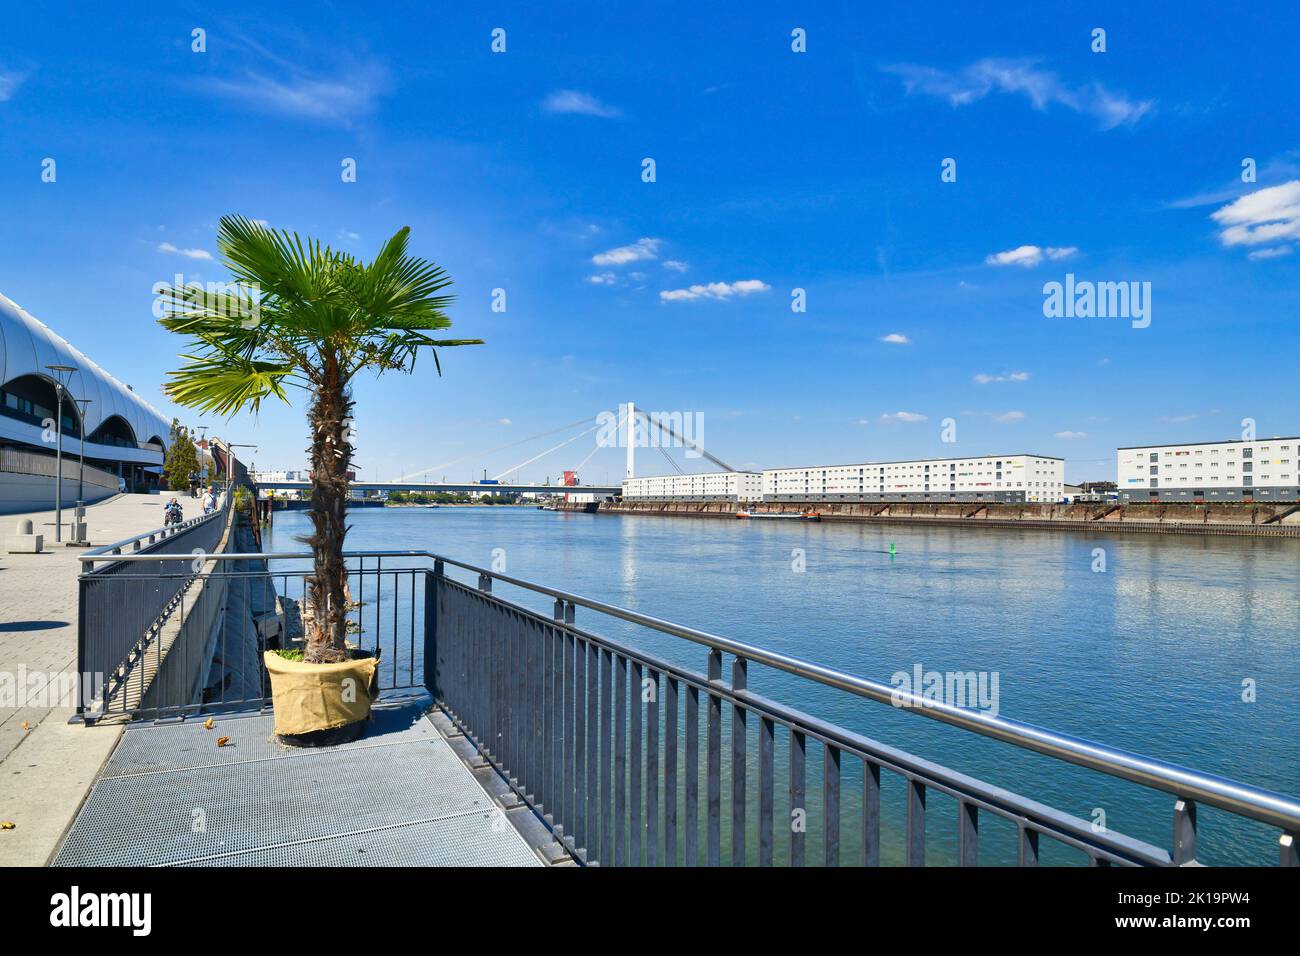 Ludwigshafen, Germany - August 2022: View over Rhine river from promenade with palm tree Stock Photo